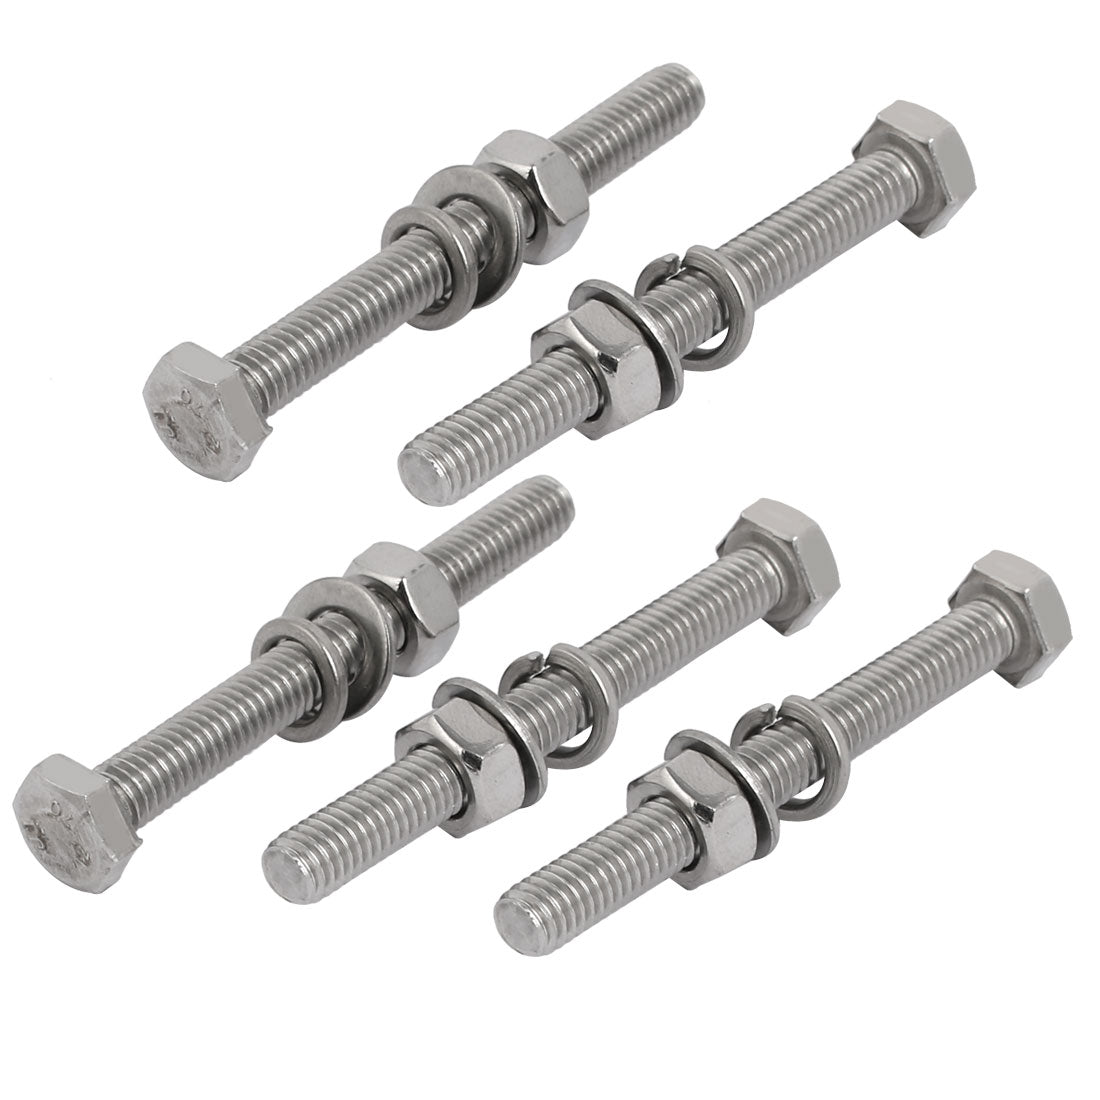 uxcell Uxcell 5pcs 304 Stainless Steel M6x60mm Hex Bolts w Nuts and Washers Assortment Kit